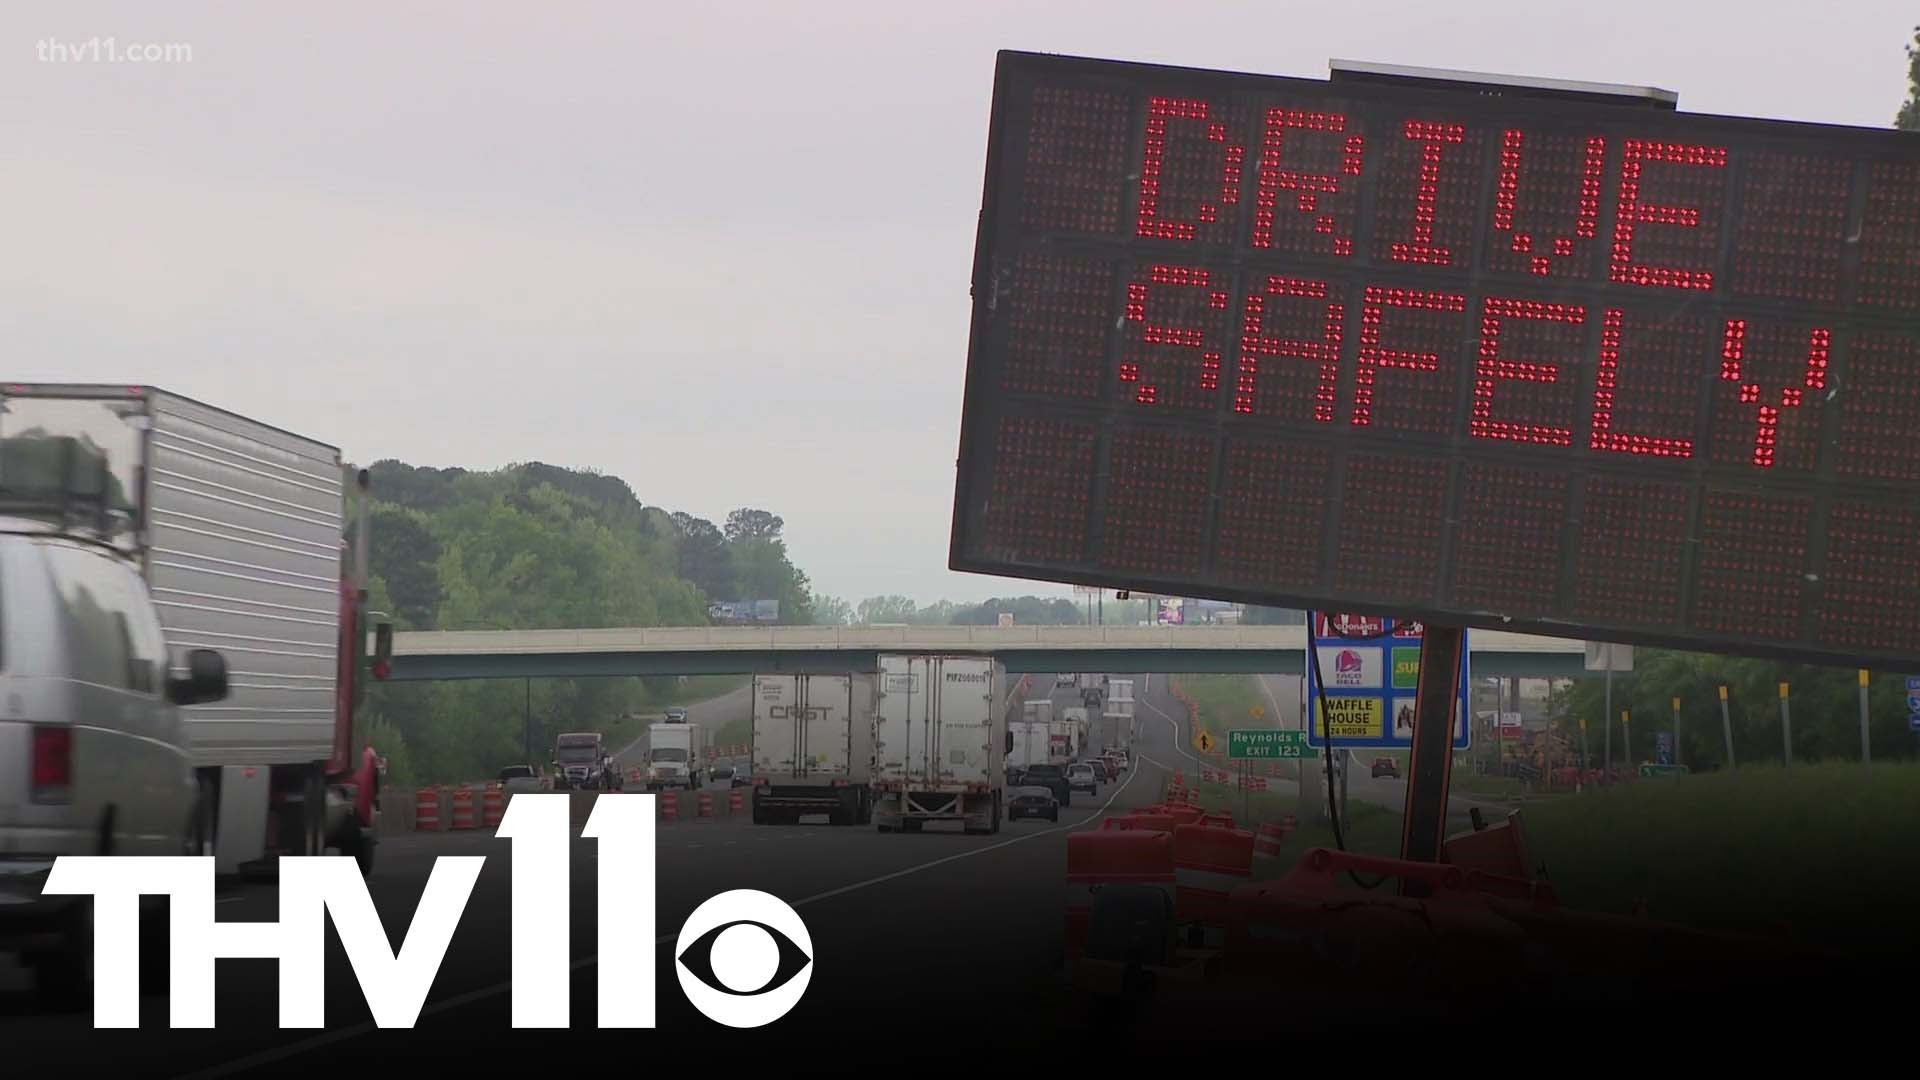 Reports show that 857 people died in work zone crashes across the US last year. A new law is bringing new technology in hopes of reducing that number in Arkansas.